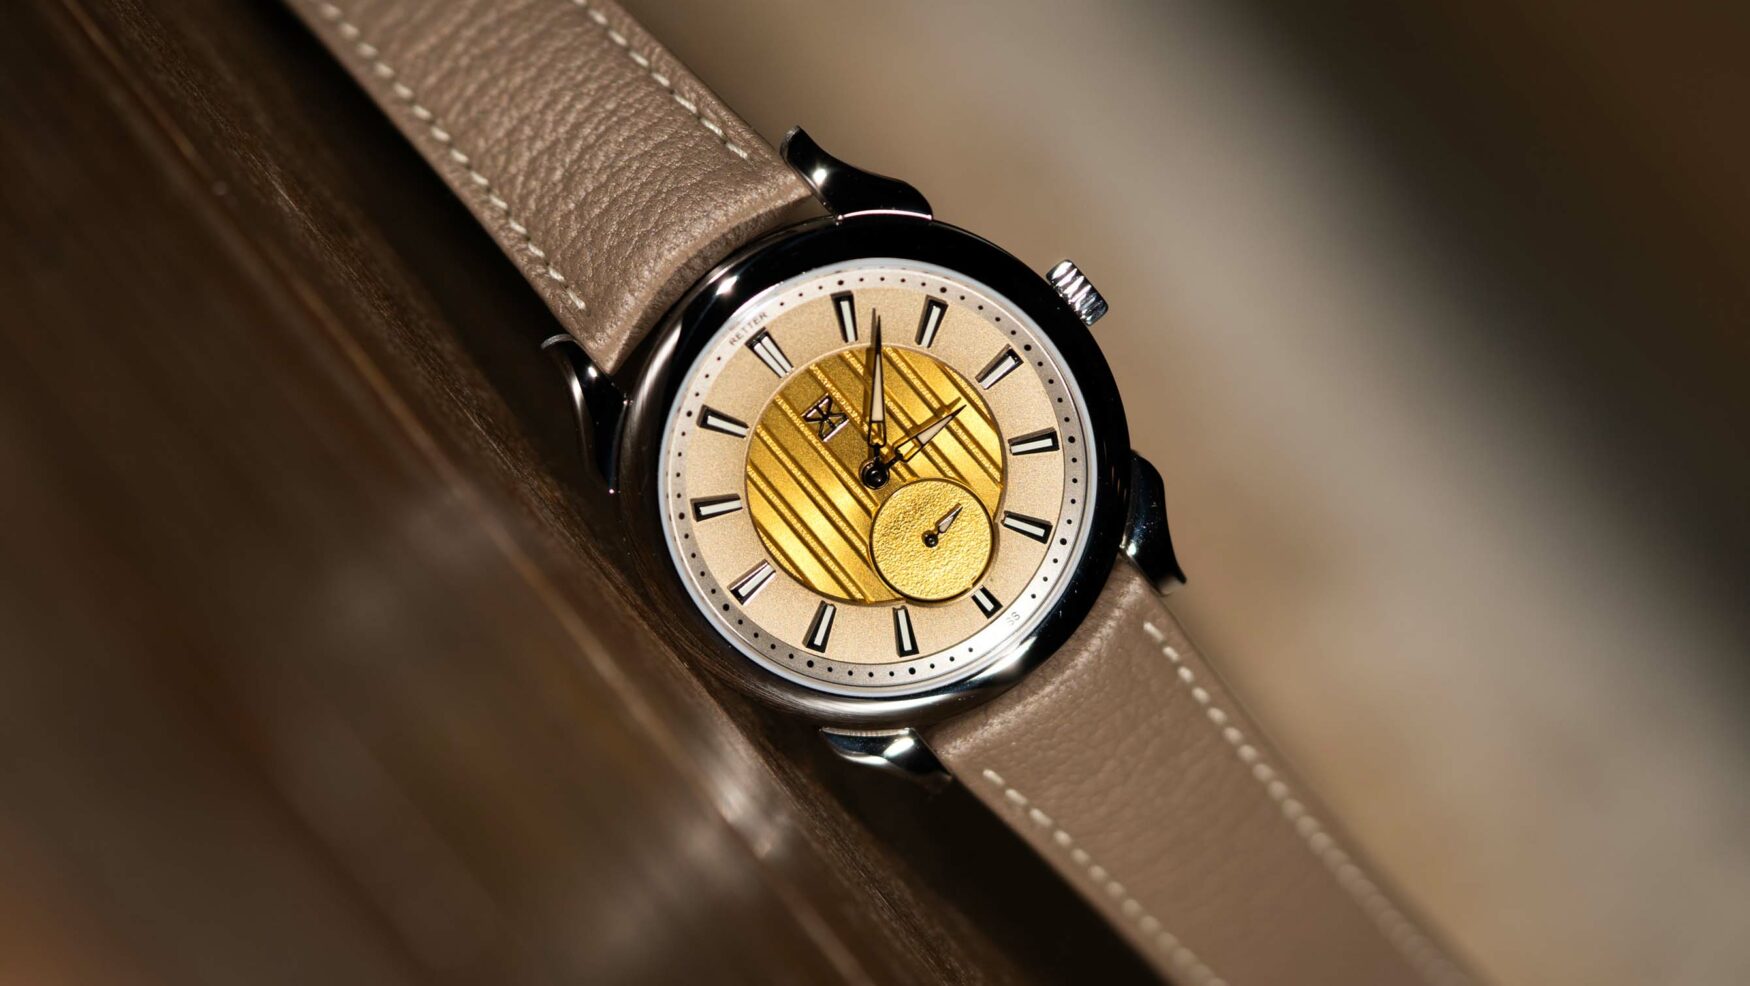 The Retter Mistral explores depth with a thin, retro-style case